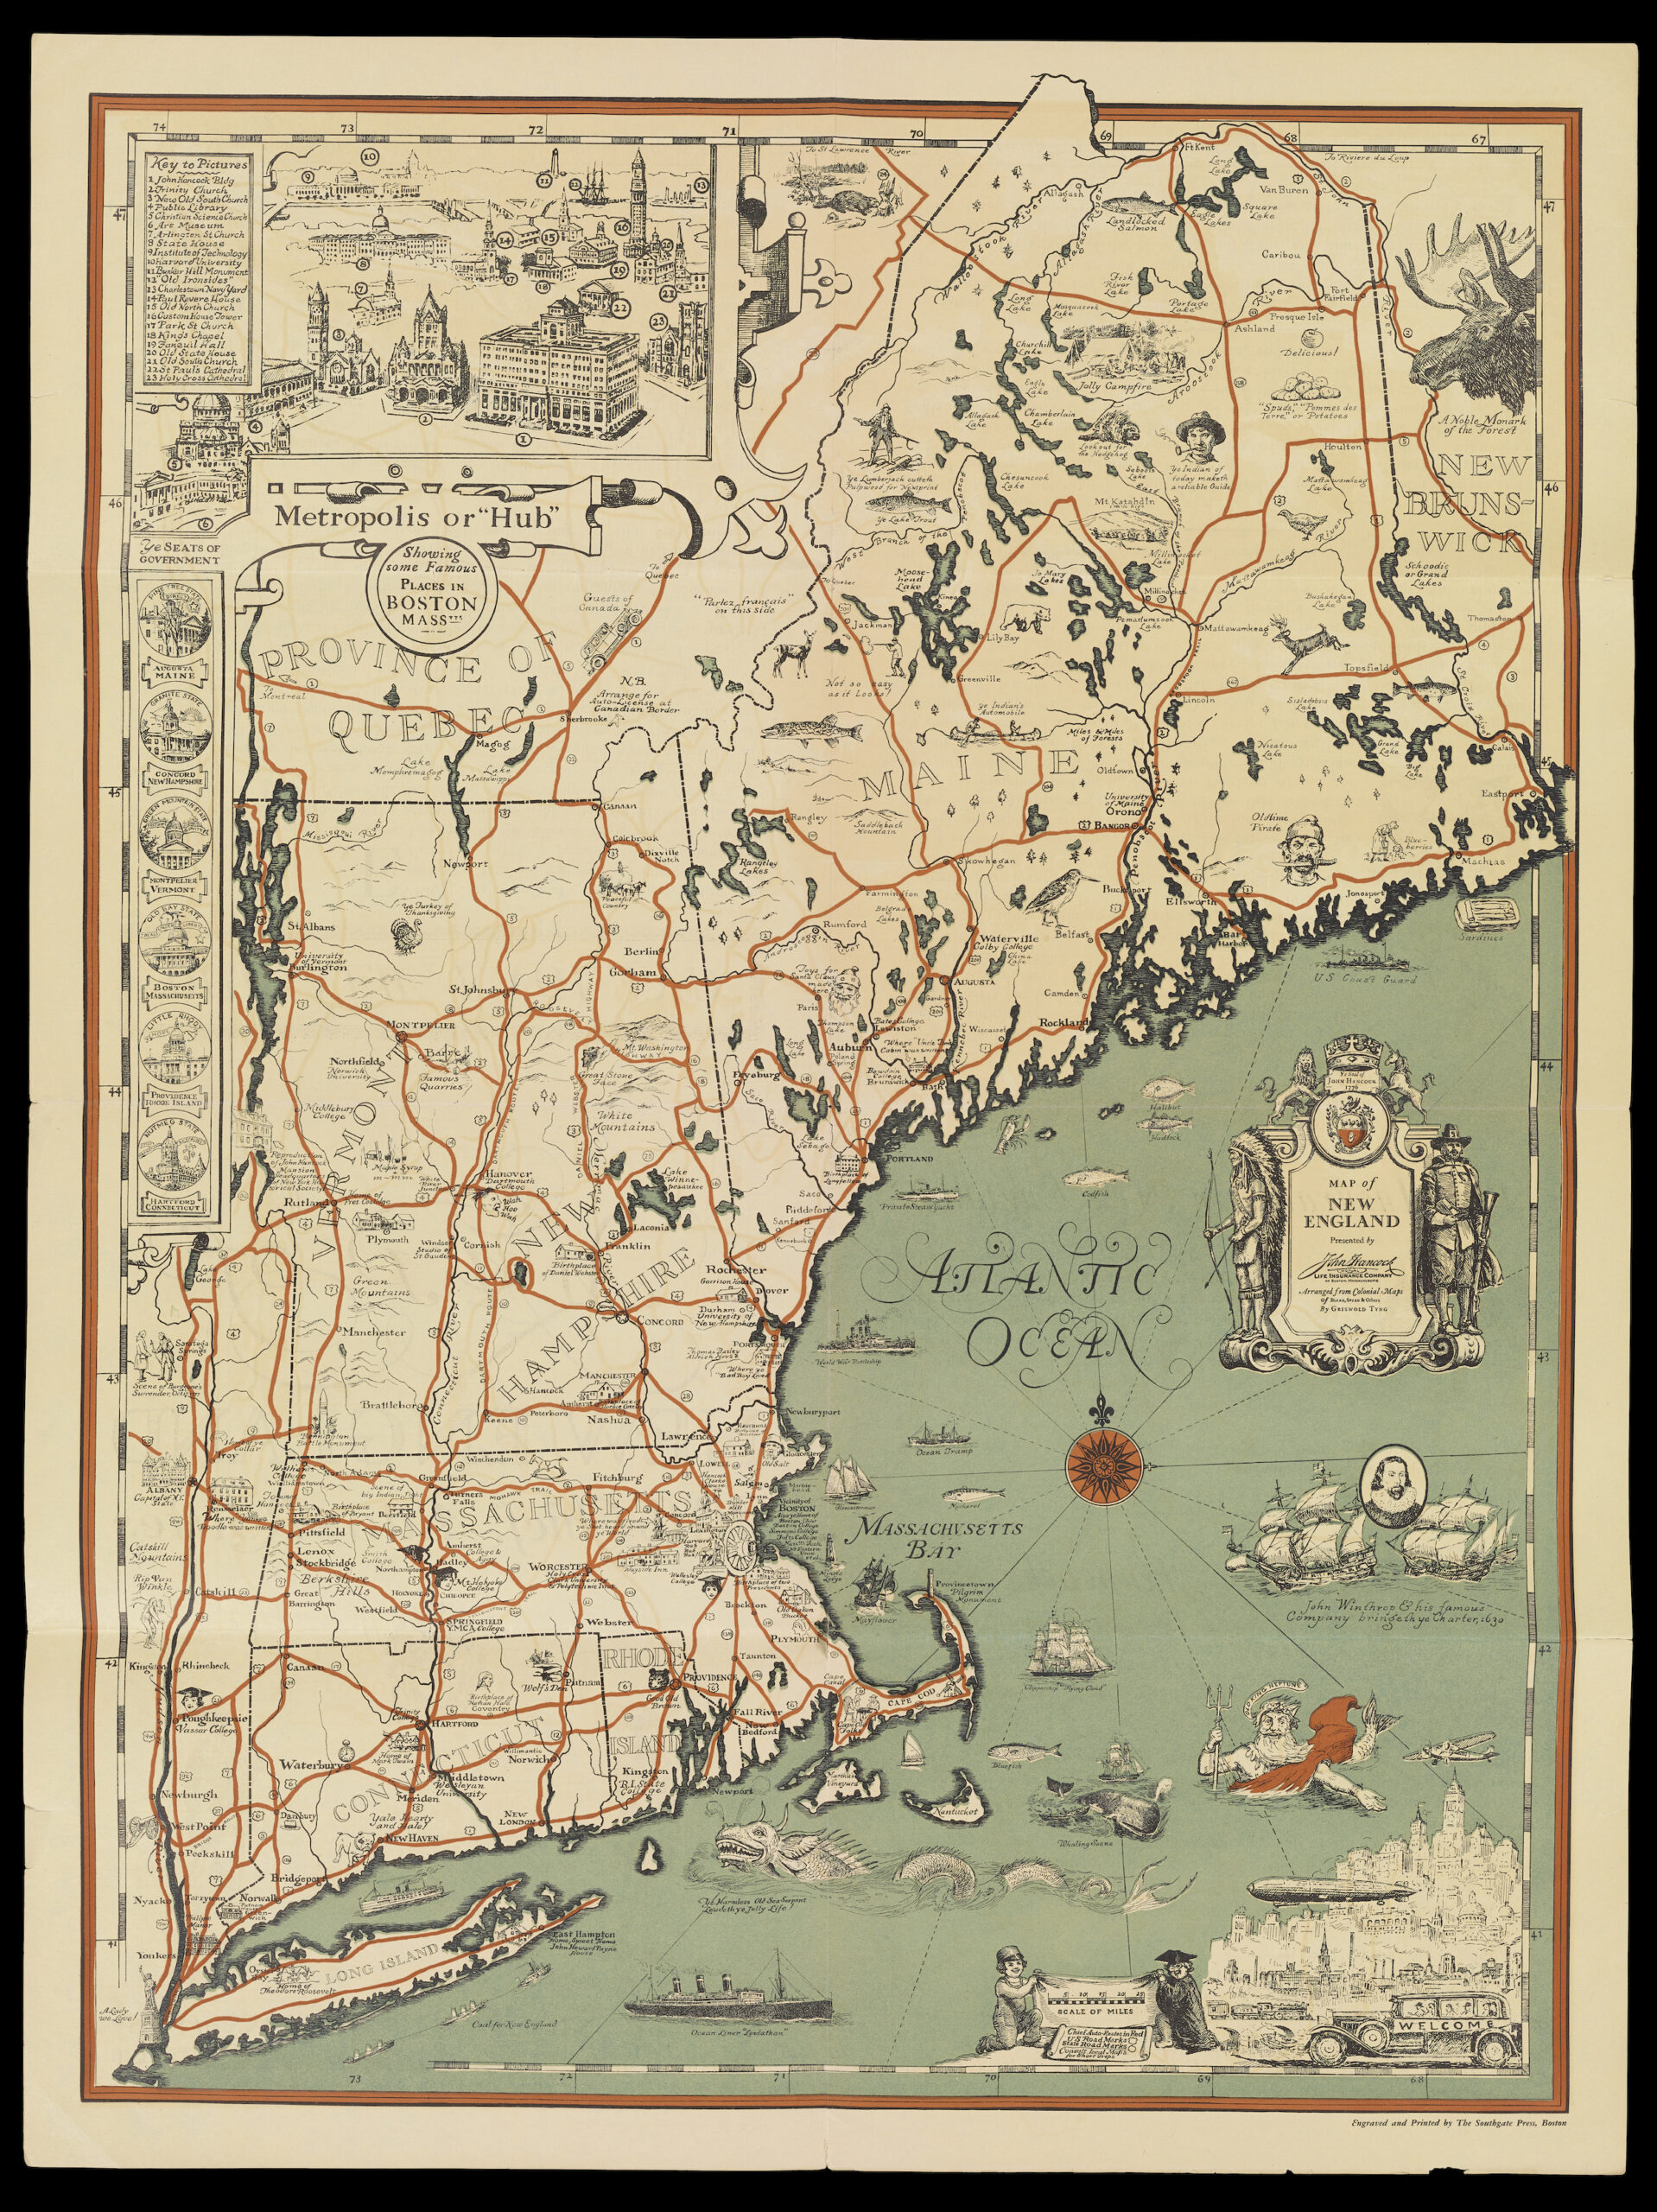 1930 map of New England, heavily illustrated